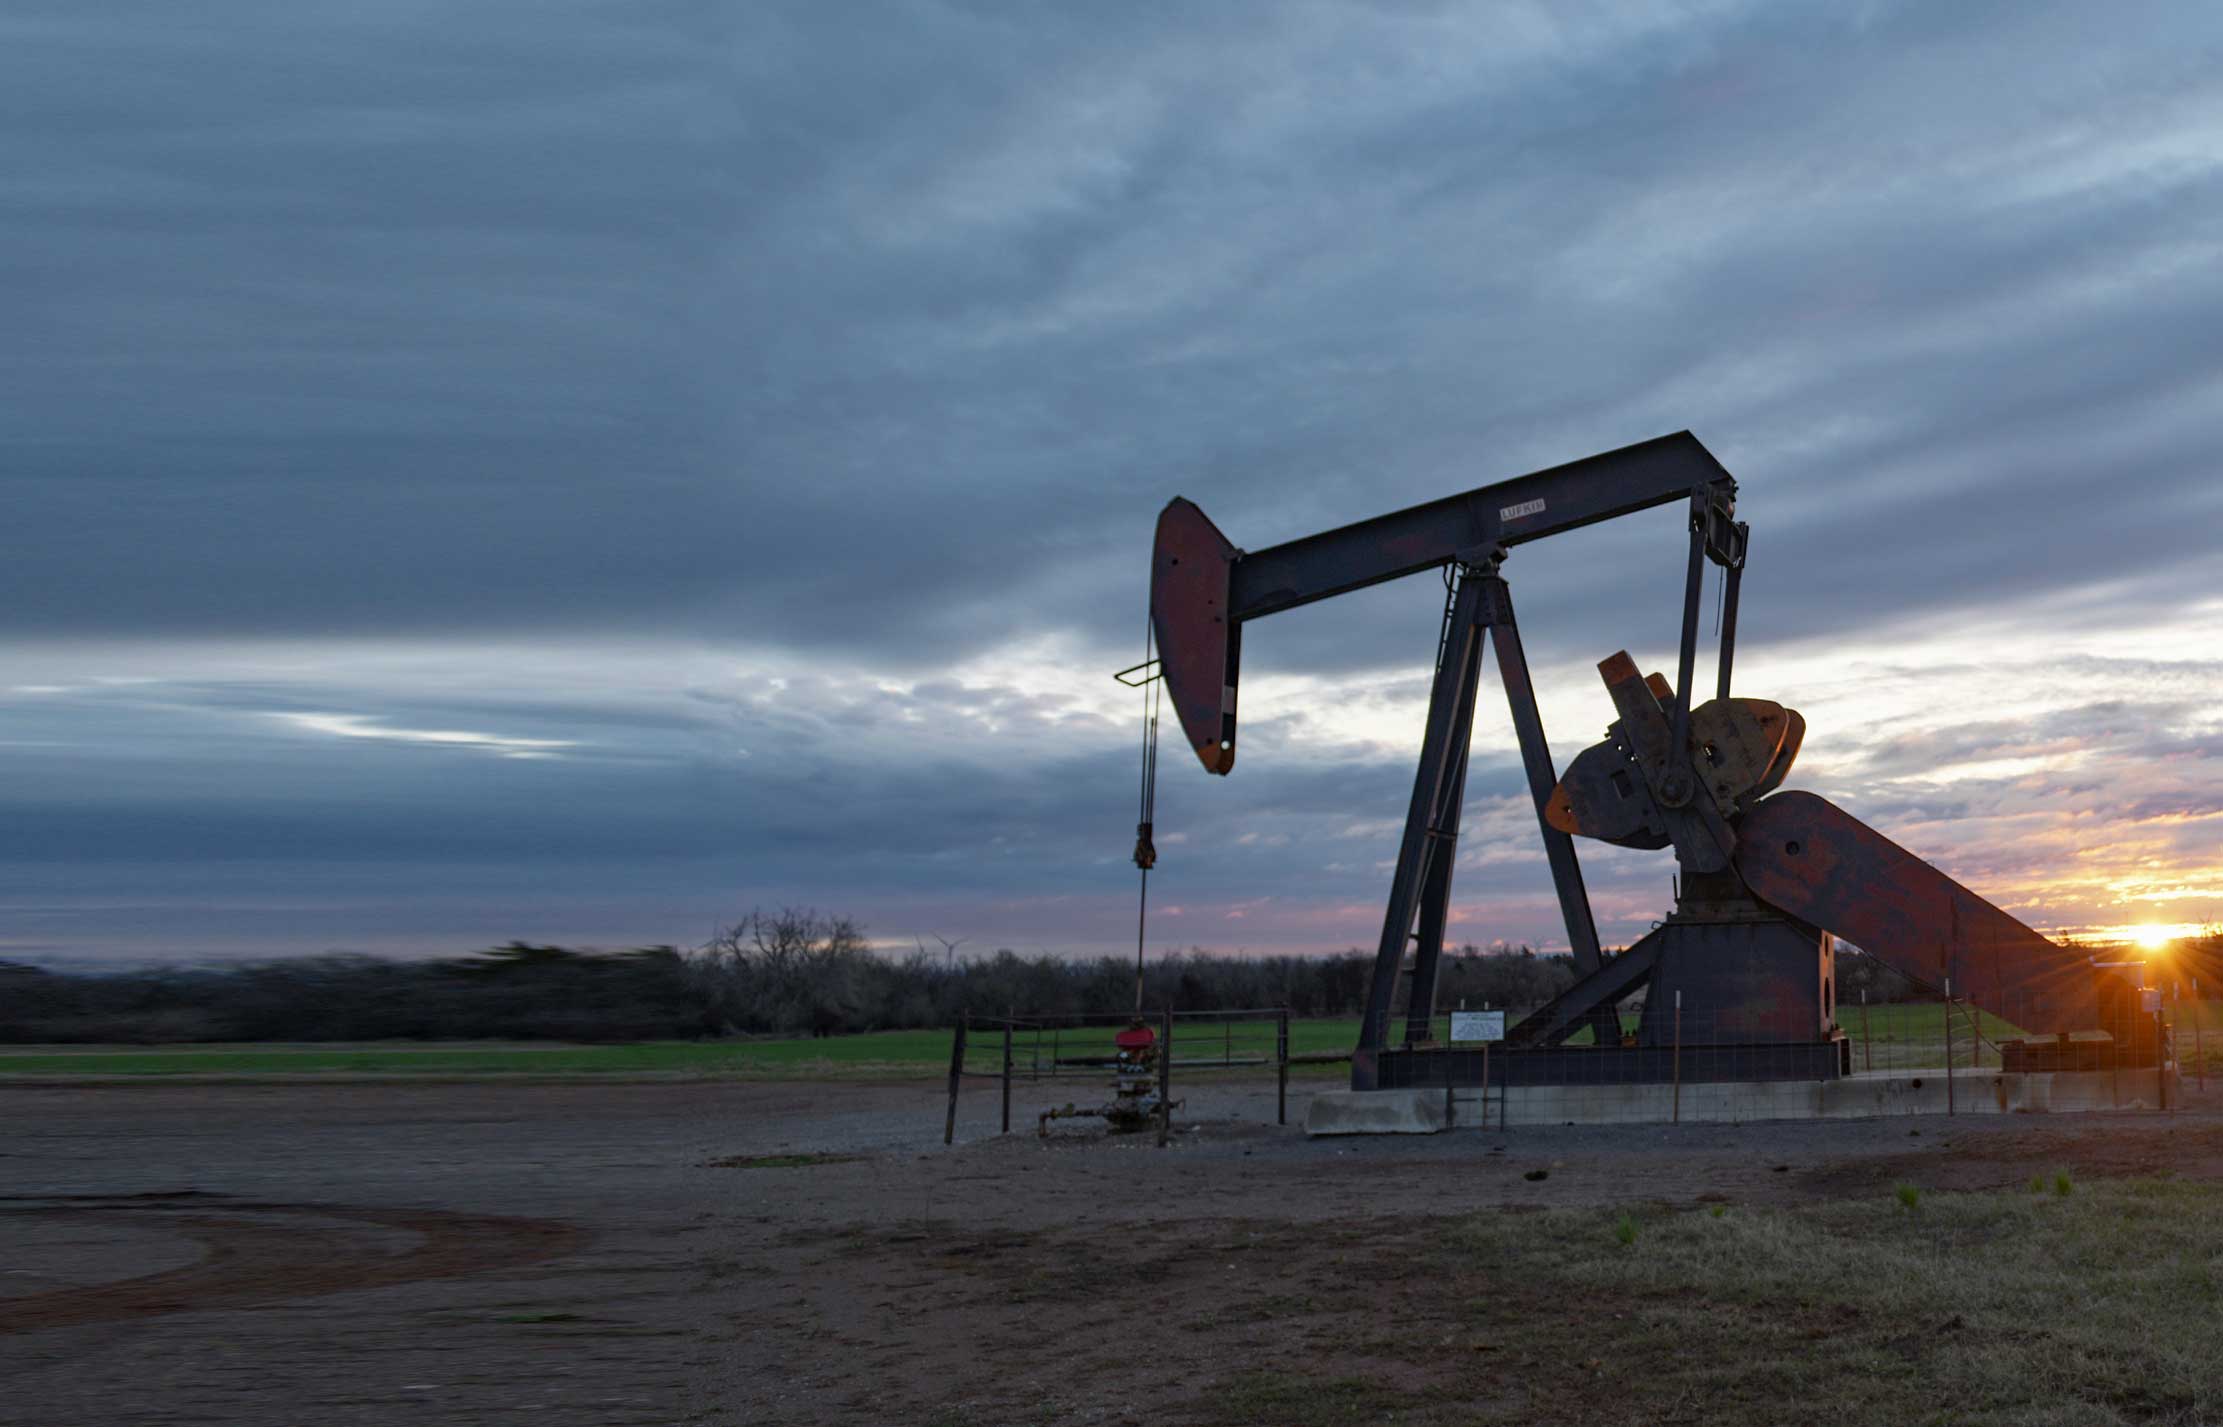 Sun is setting with cloudy gray skies with a pump jack